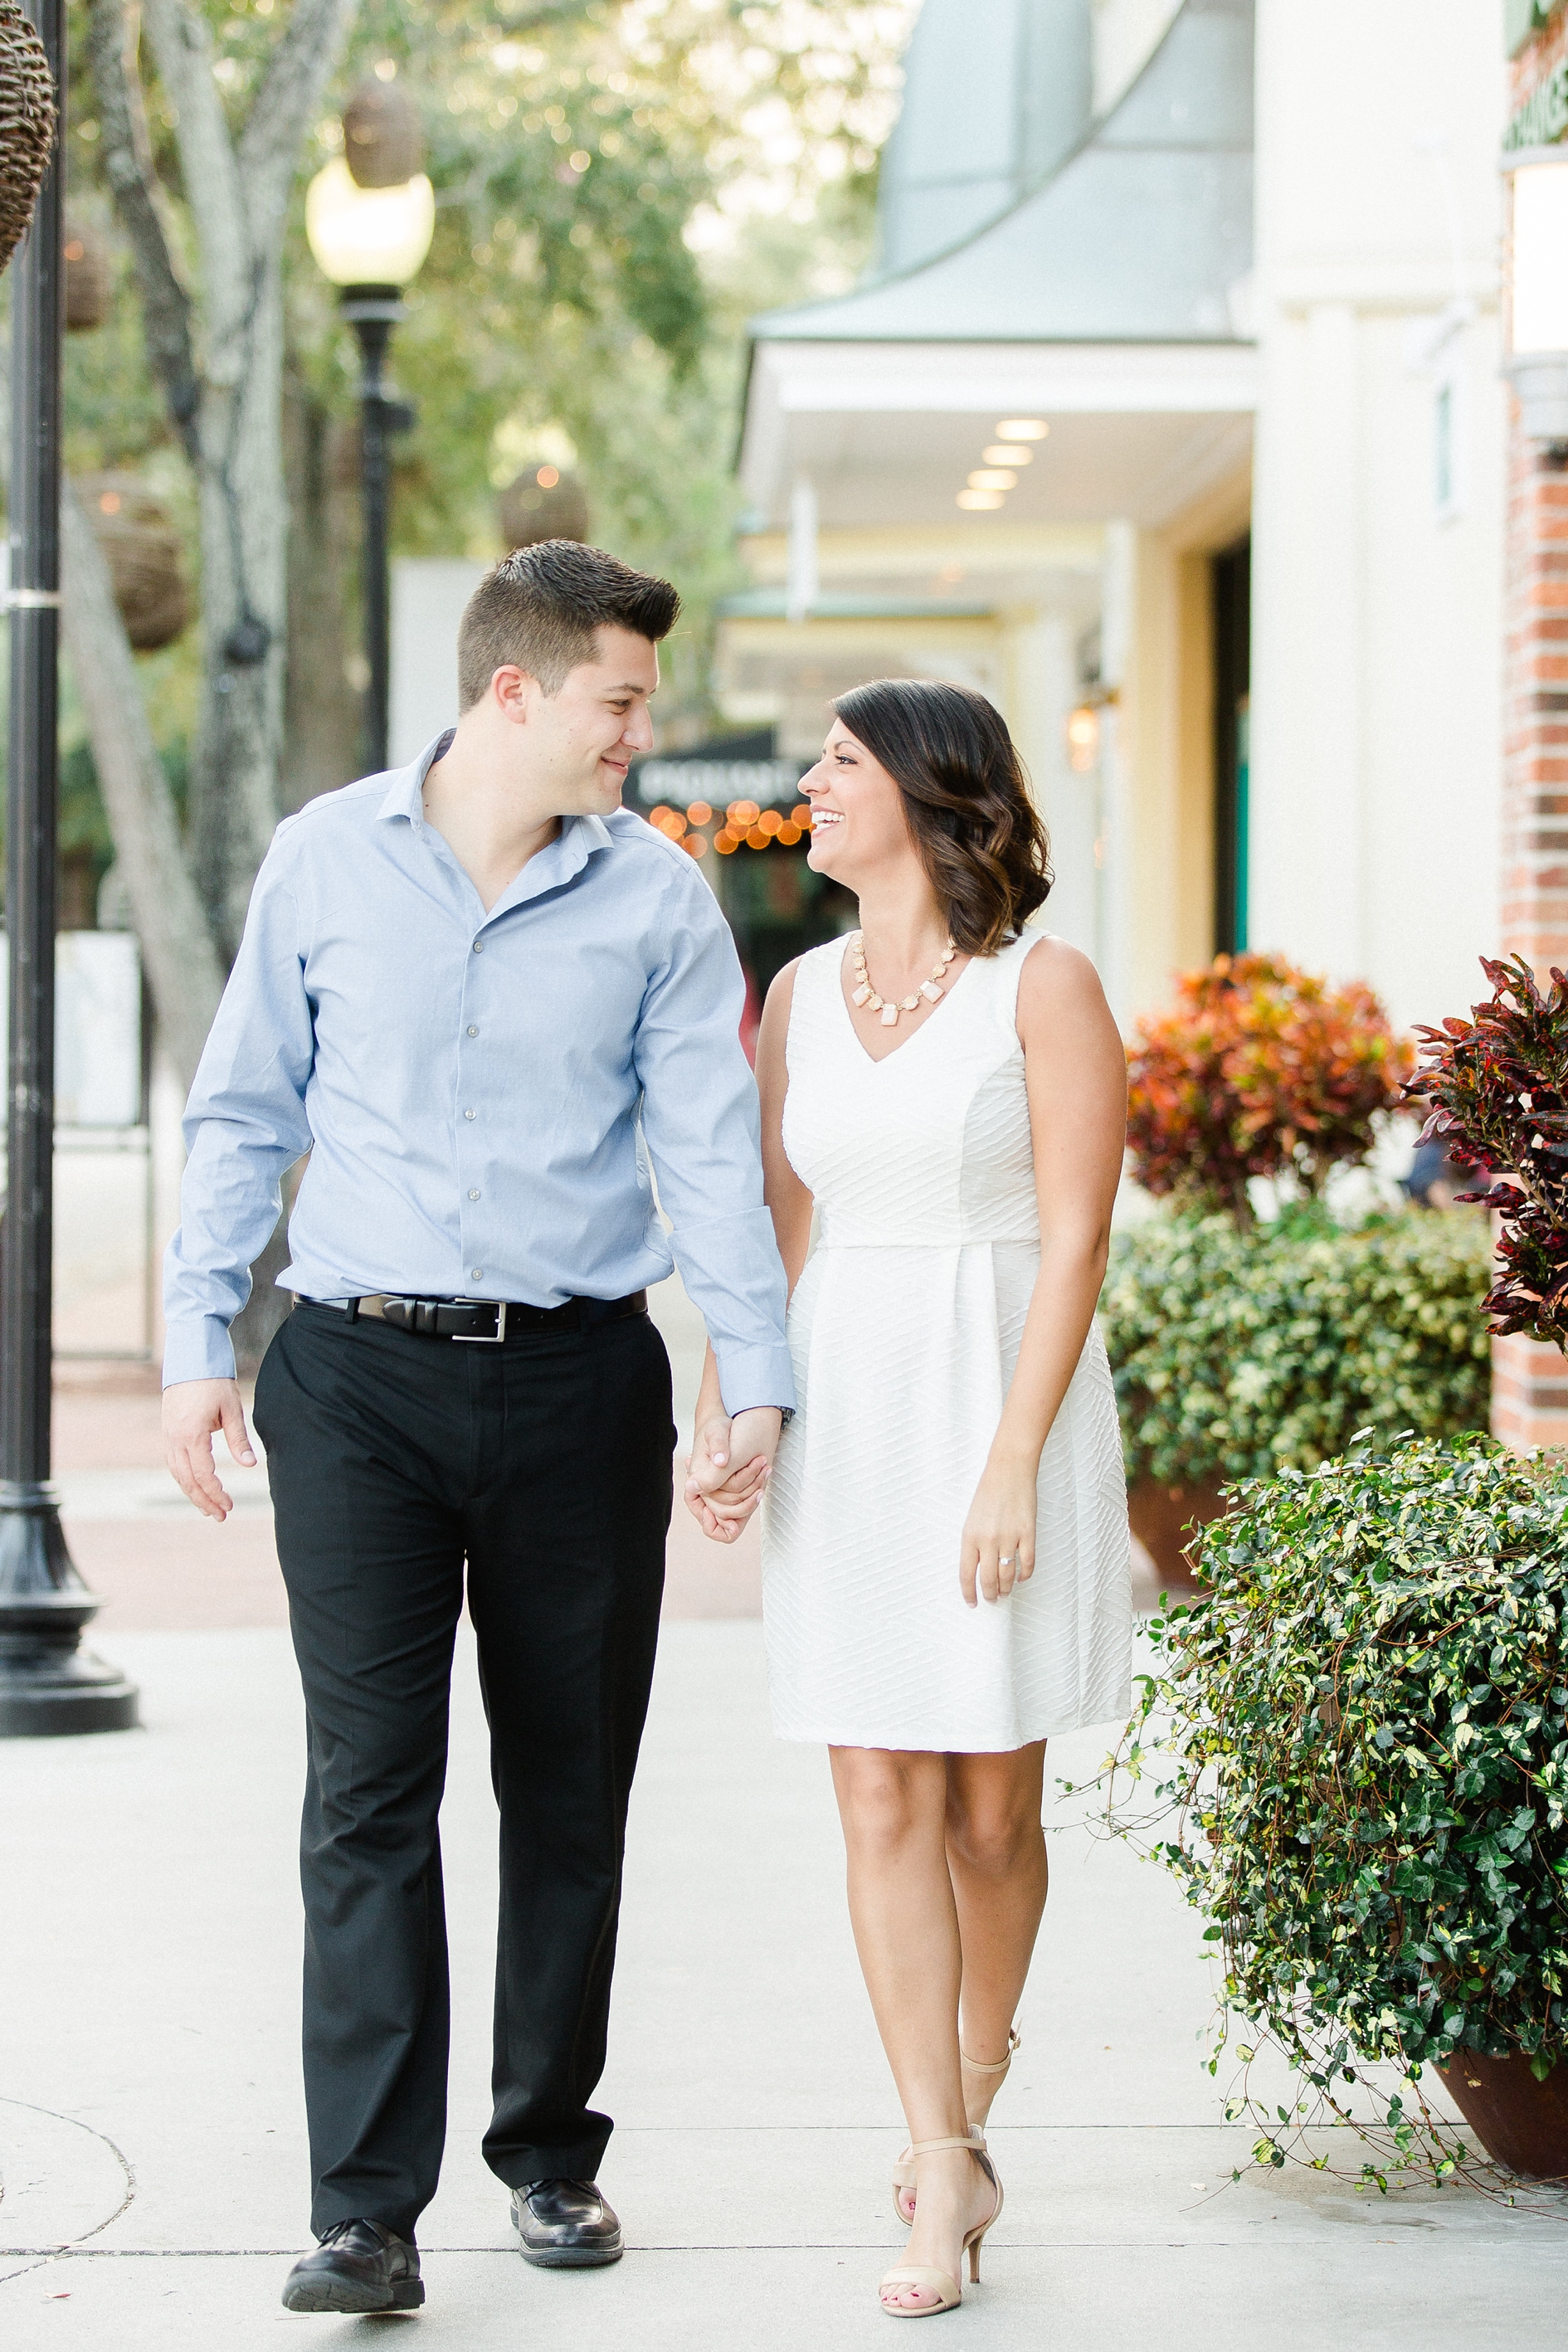 South Tampa Engagement | © Ailyn La Torre 2016